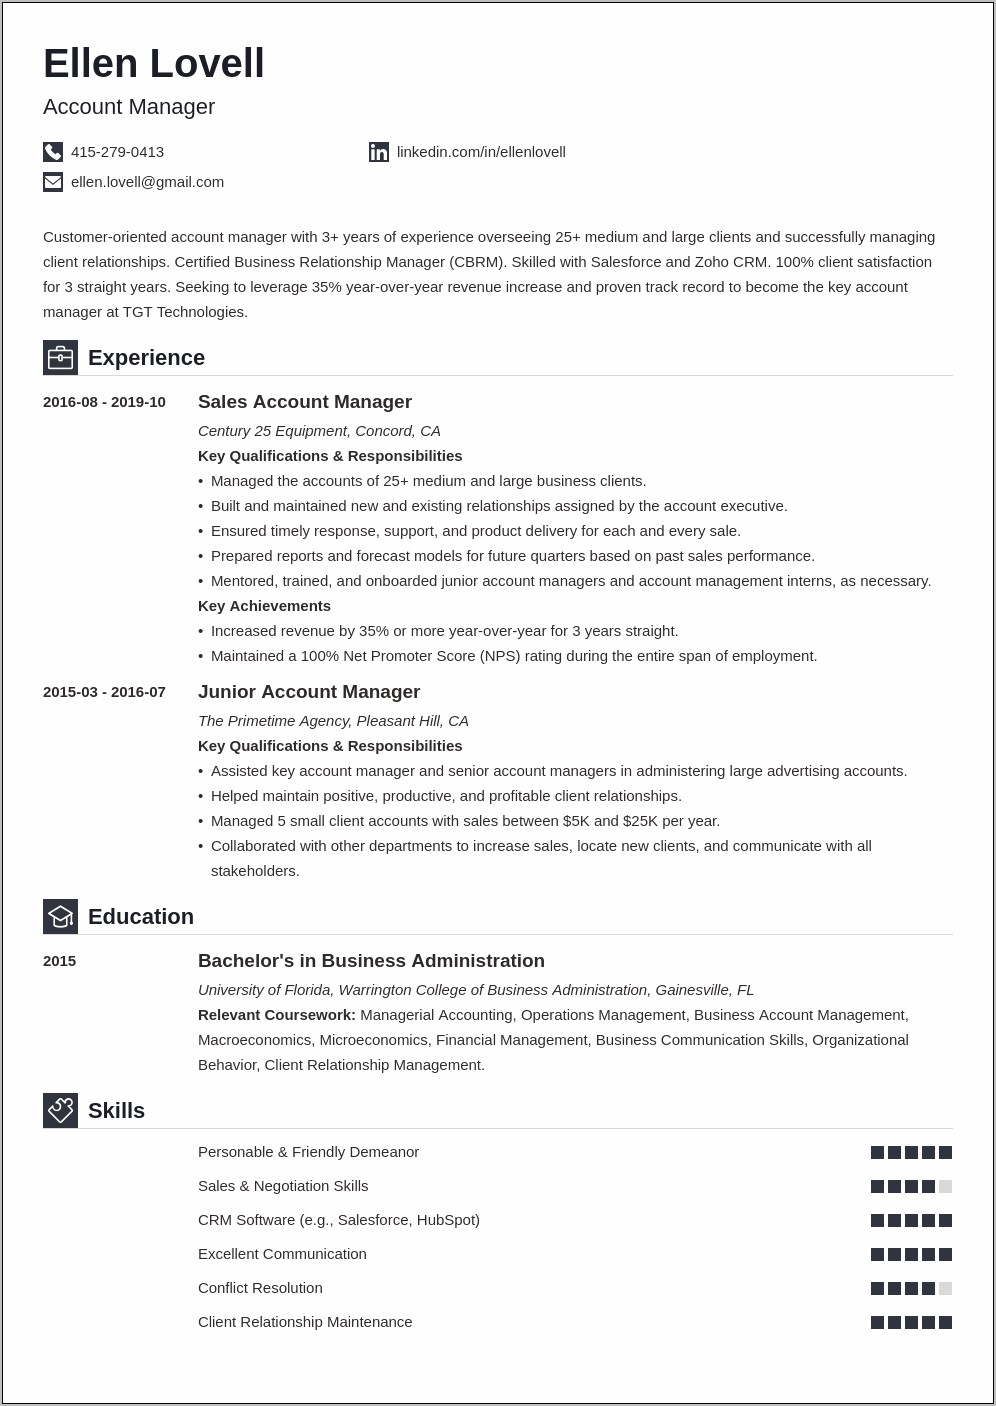 Account Manager Advertising Agency Resume